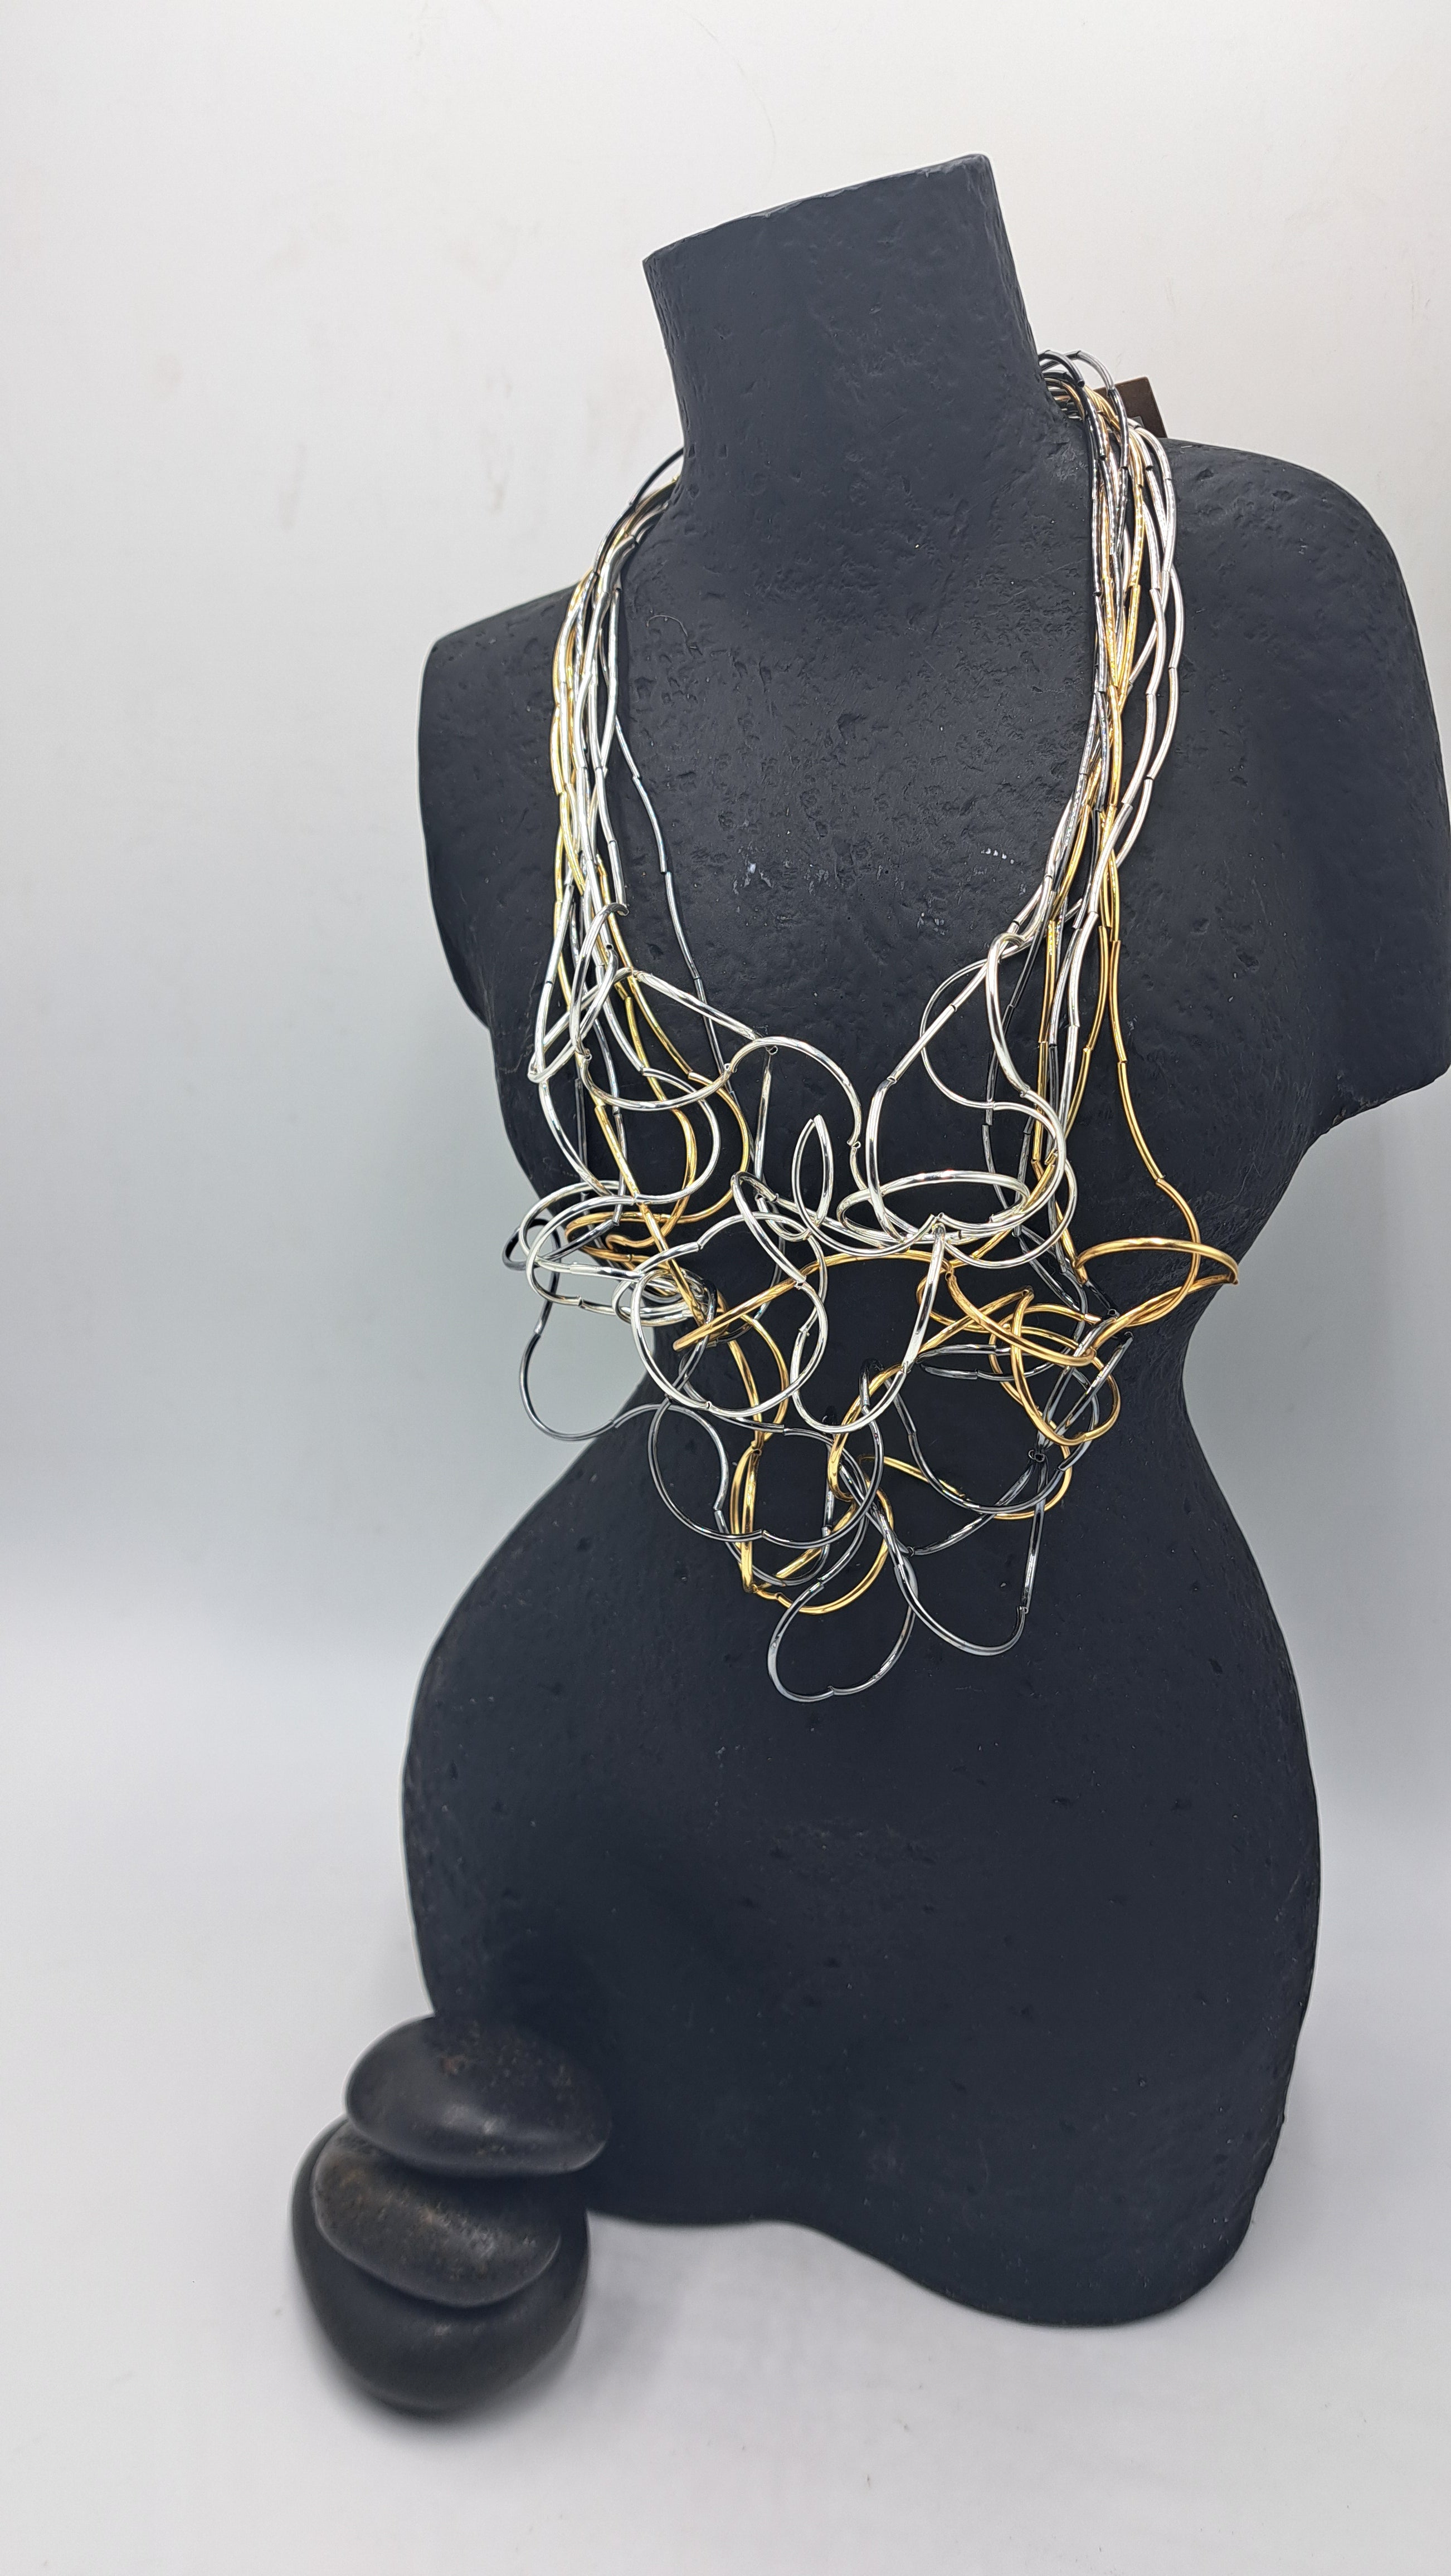 Statement Wire Choker Necklace, 3 Tone Color